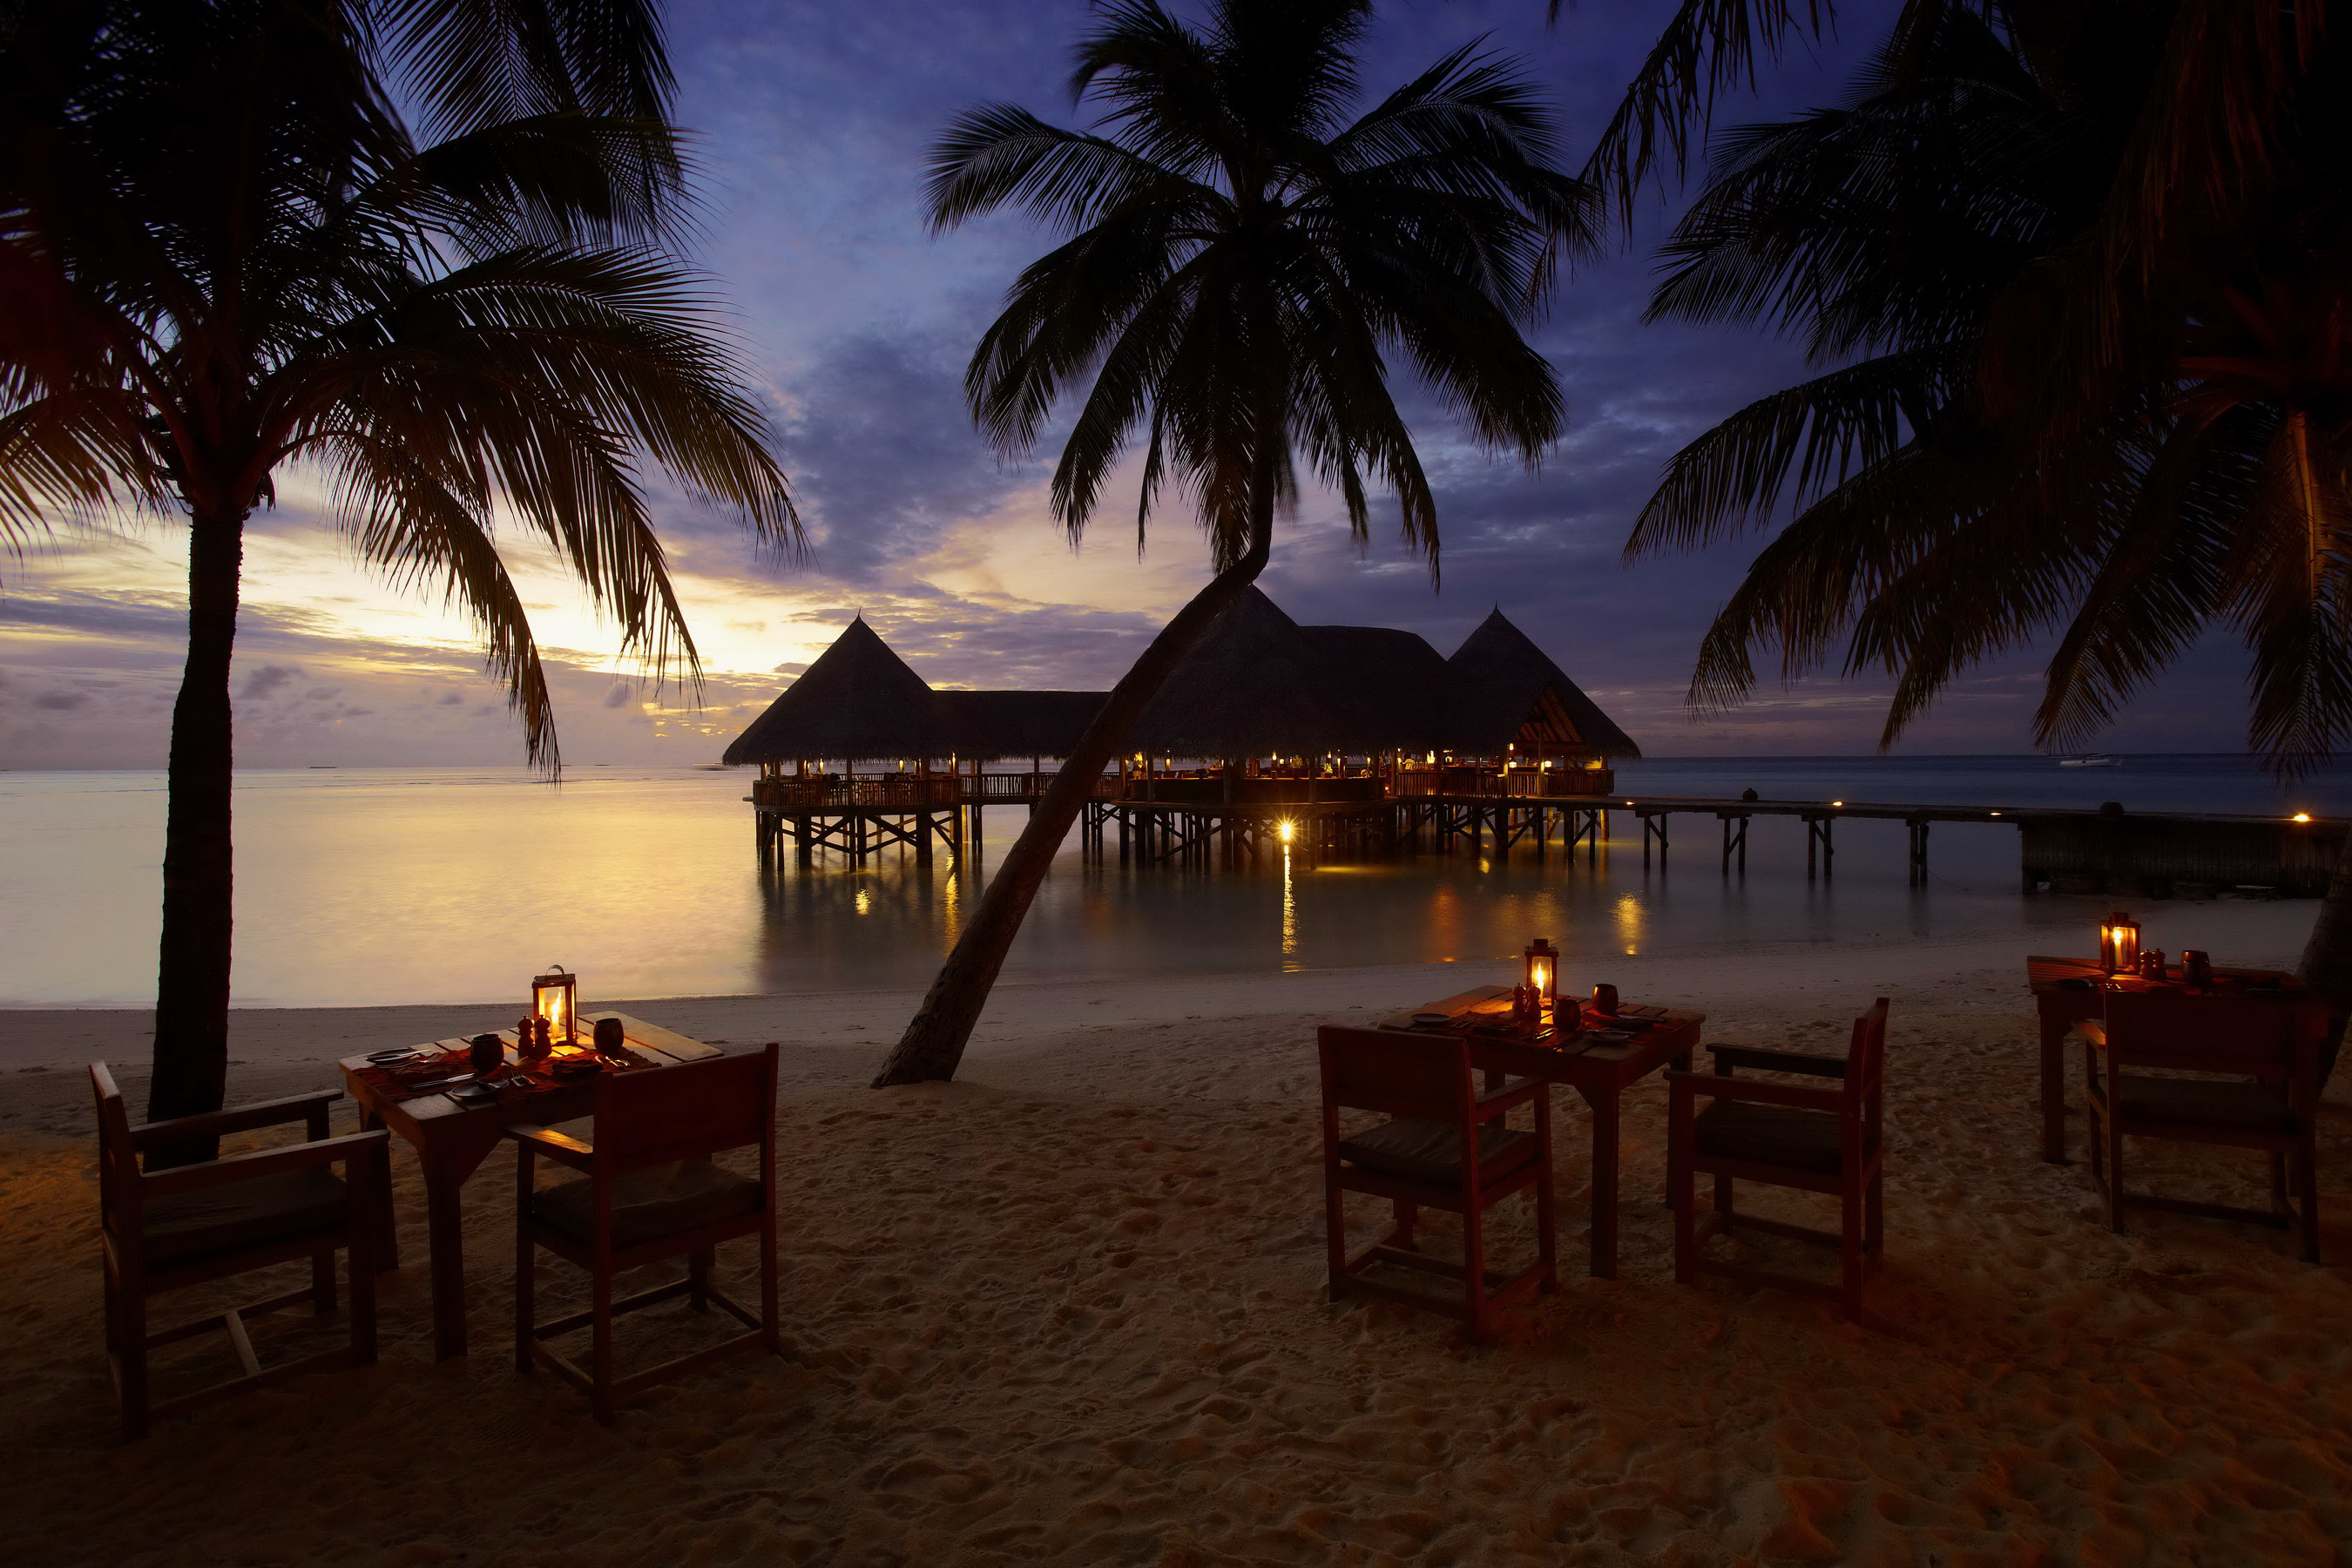 maldives, photography, holiday, beach, bungalow, chair, evening, horizon, palm tree, table